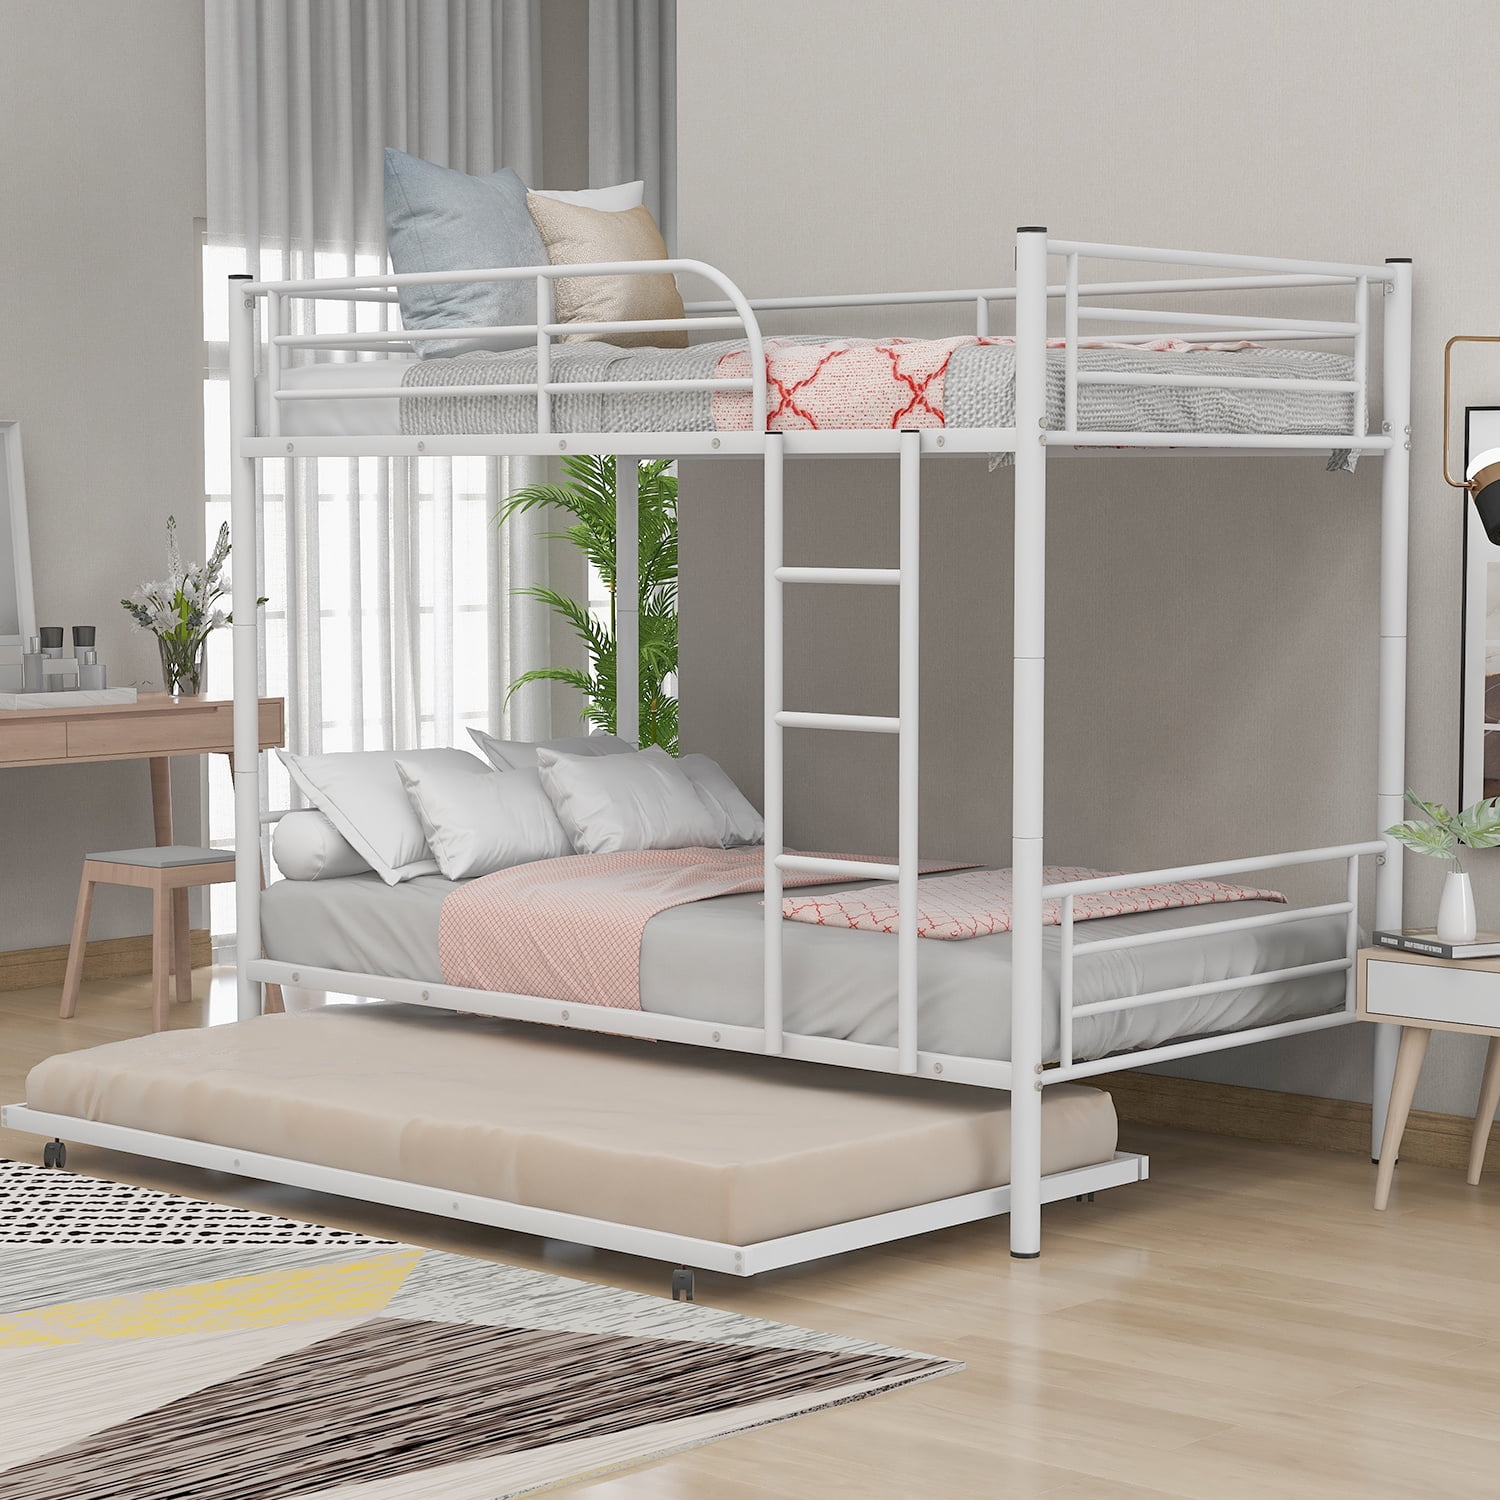 Metal Triple Bunk Bed With Trundle And, Bunk Bed Separates Into Singles